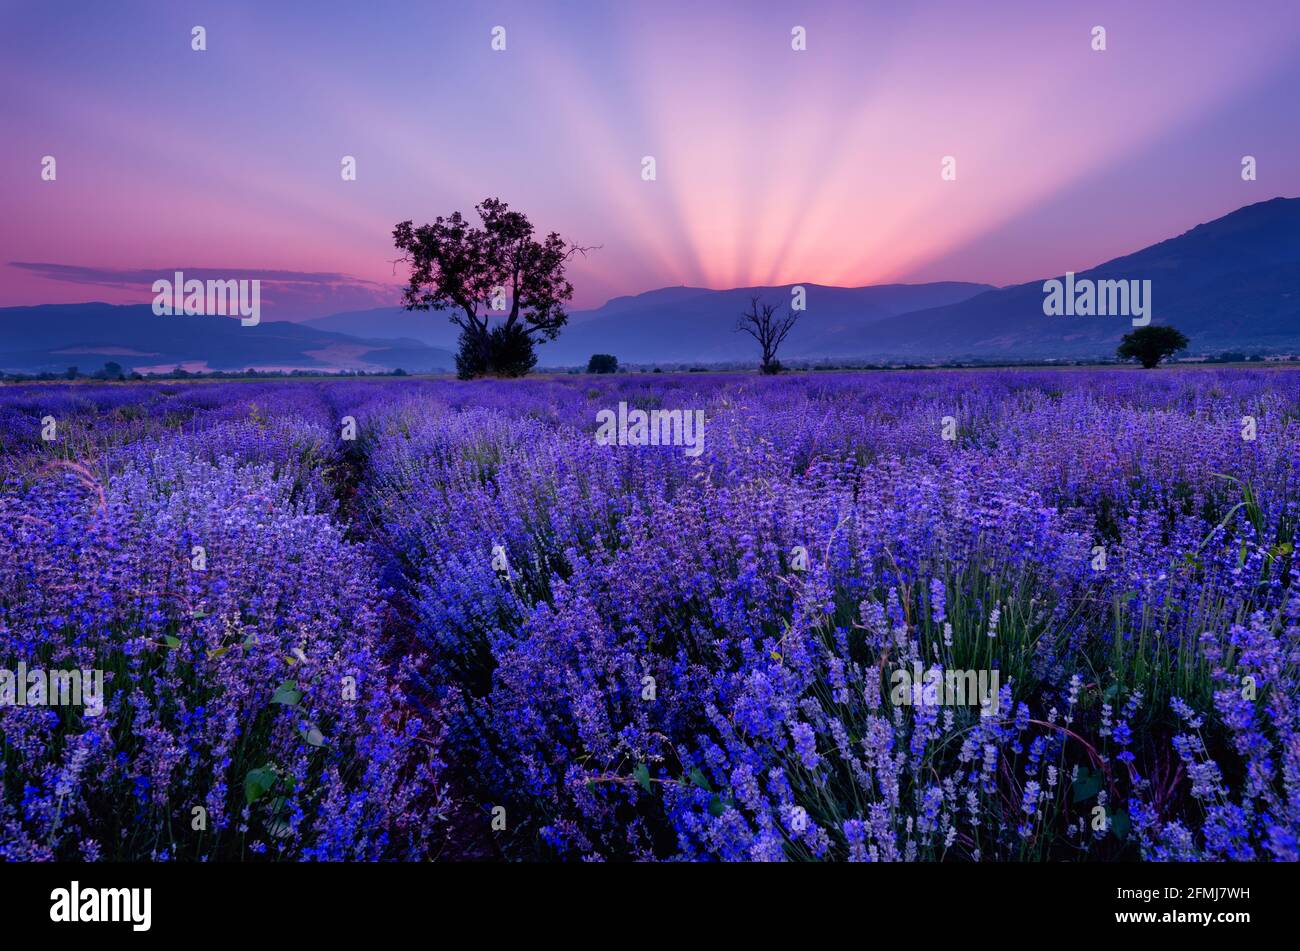 Lavender fields. Beautiful image of lavender field. Summer sunset landscape, contrasting colors. Dark clouds, dramatic sunset. Stock Photo